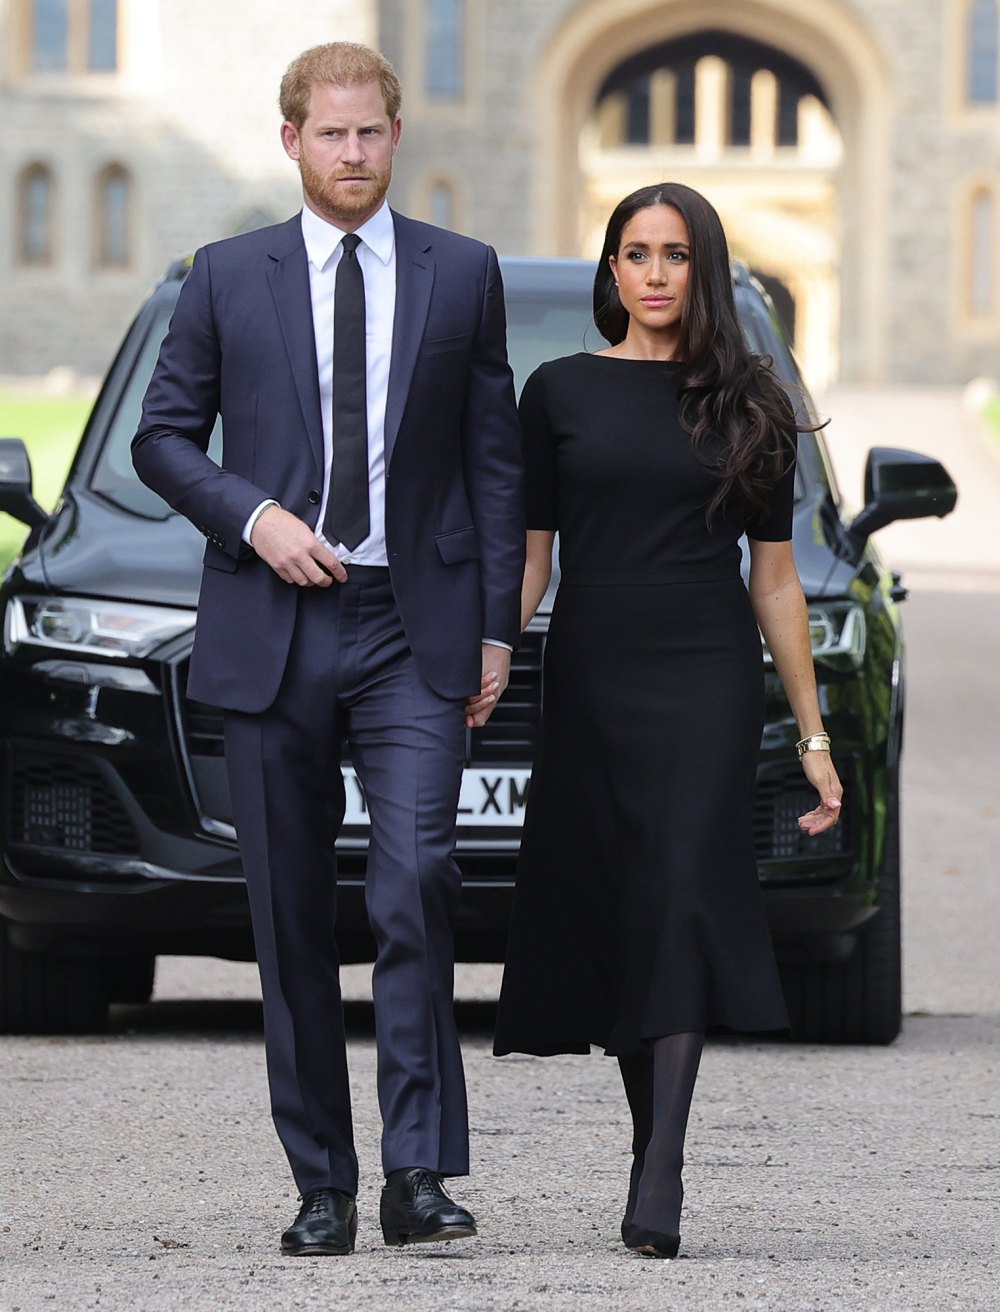 'Reckless' Behavior Could Lead to Arrests Over Prince Harry and Meghan Markle's Car Chase, NYPD Says